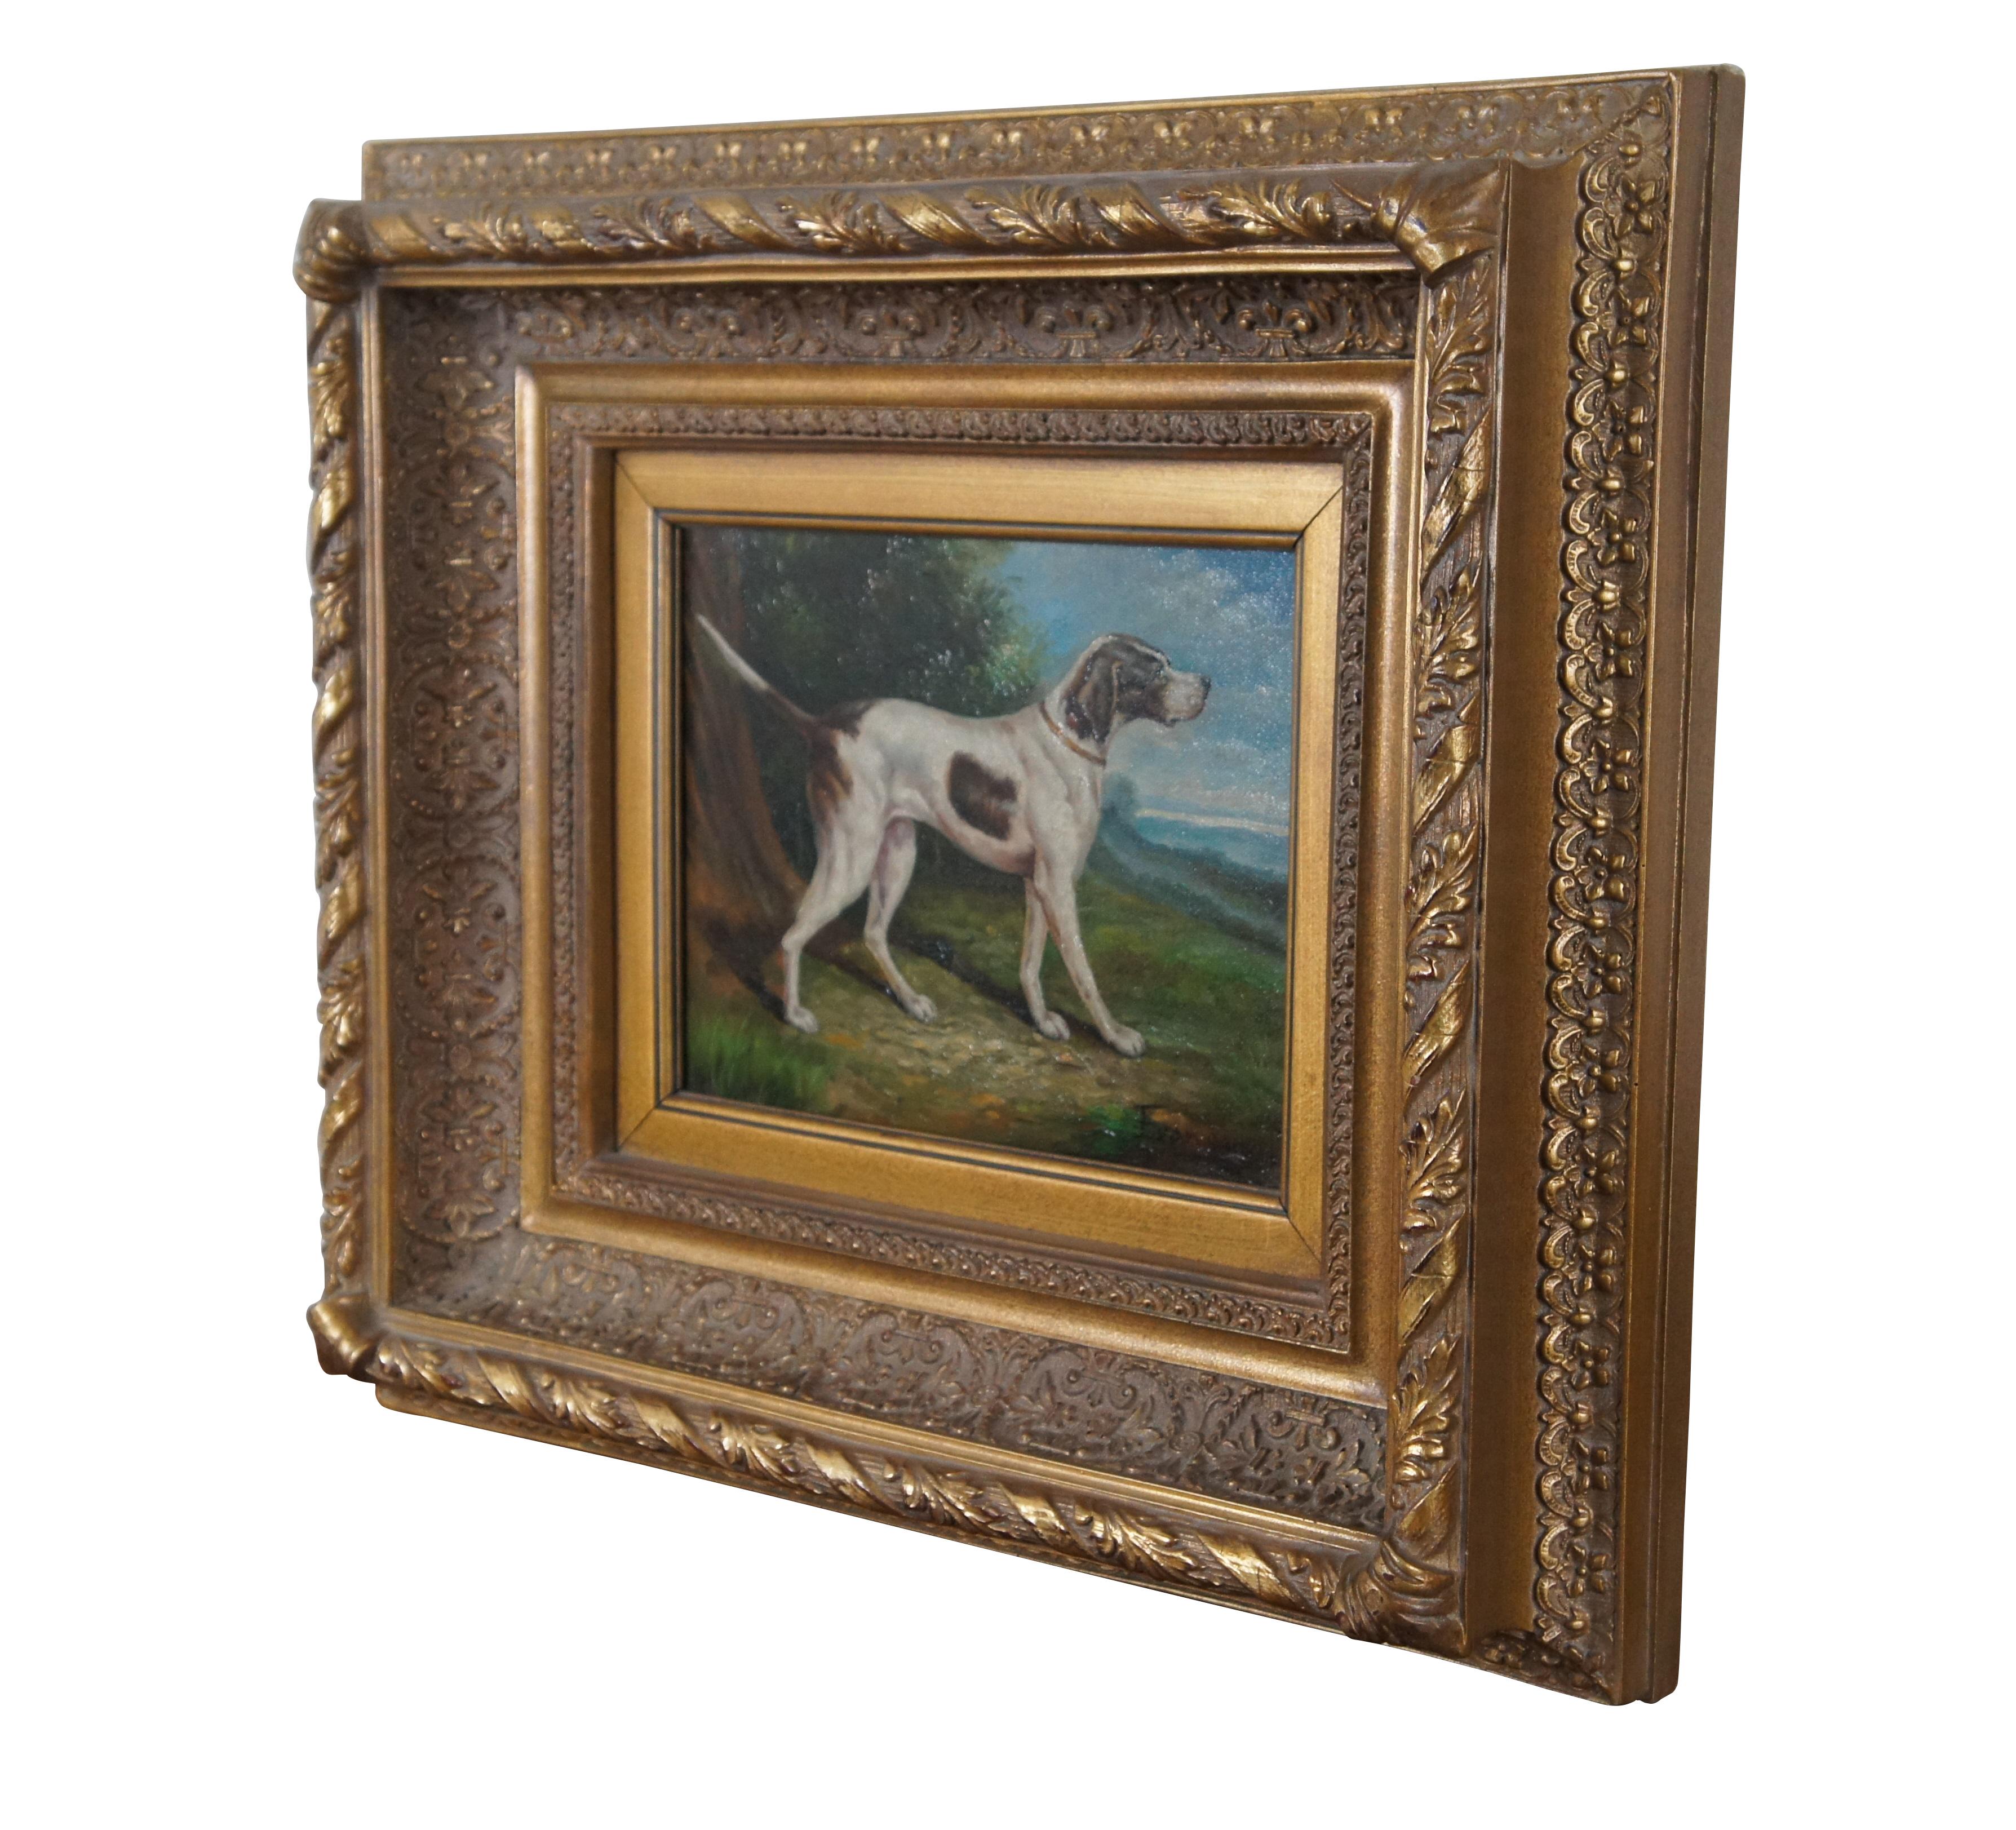 Vintage oil on canvas portrait painting of a British style hunting dog – appears to be a foxhound or pointer – standing in an idyllic landscape. Set in an antique style intricately carved and deeply beveled giltwood frame. Signed Evans in lower